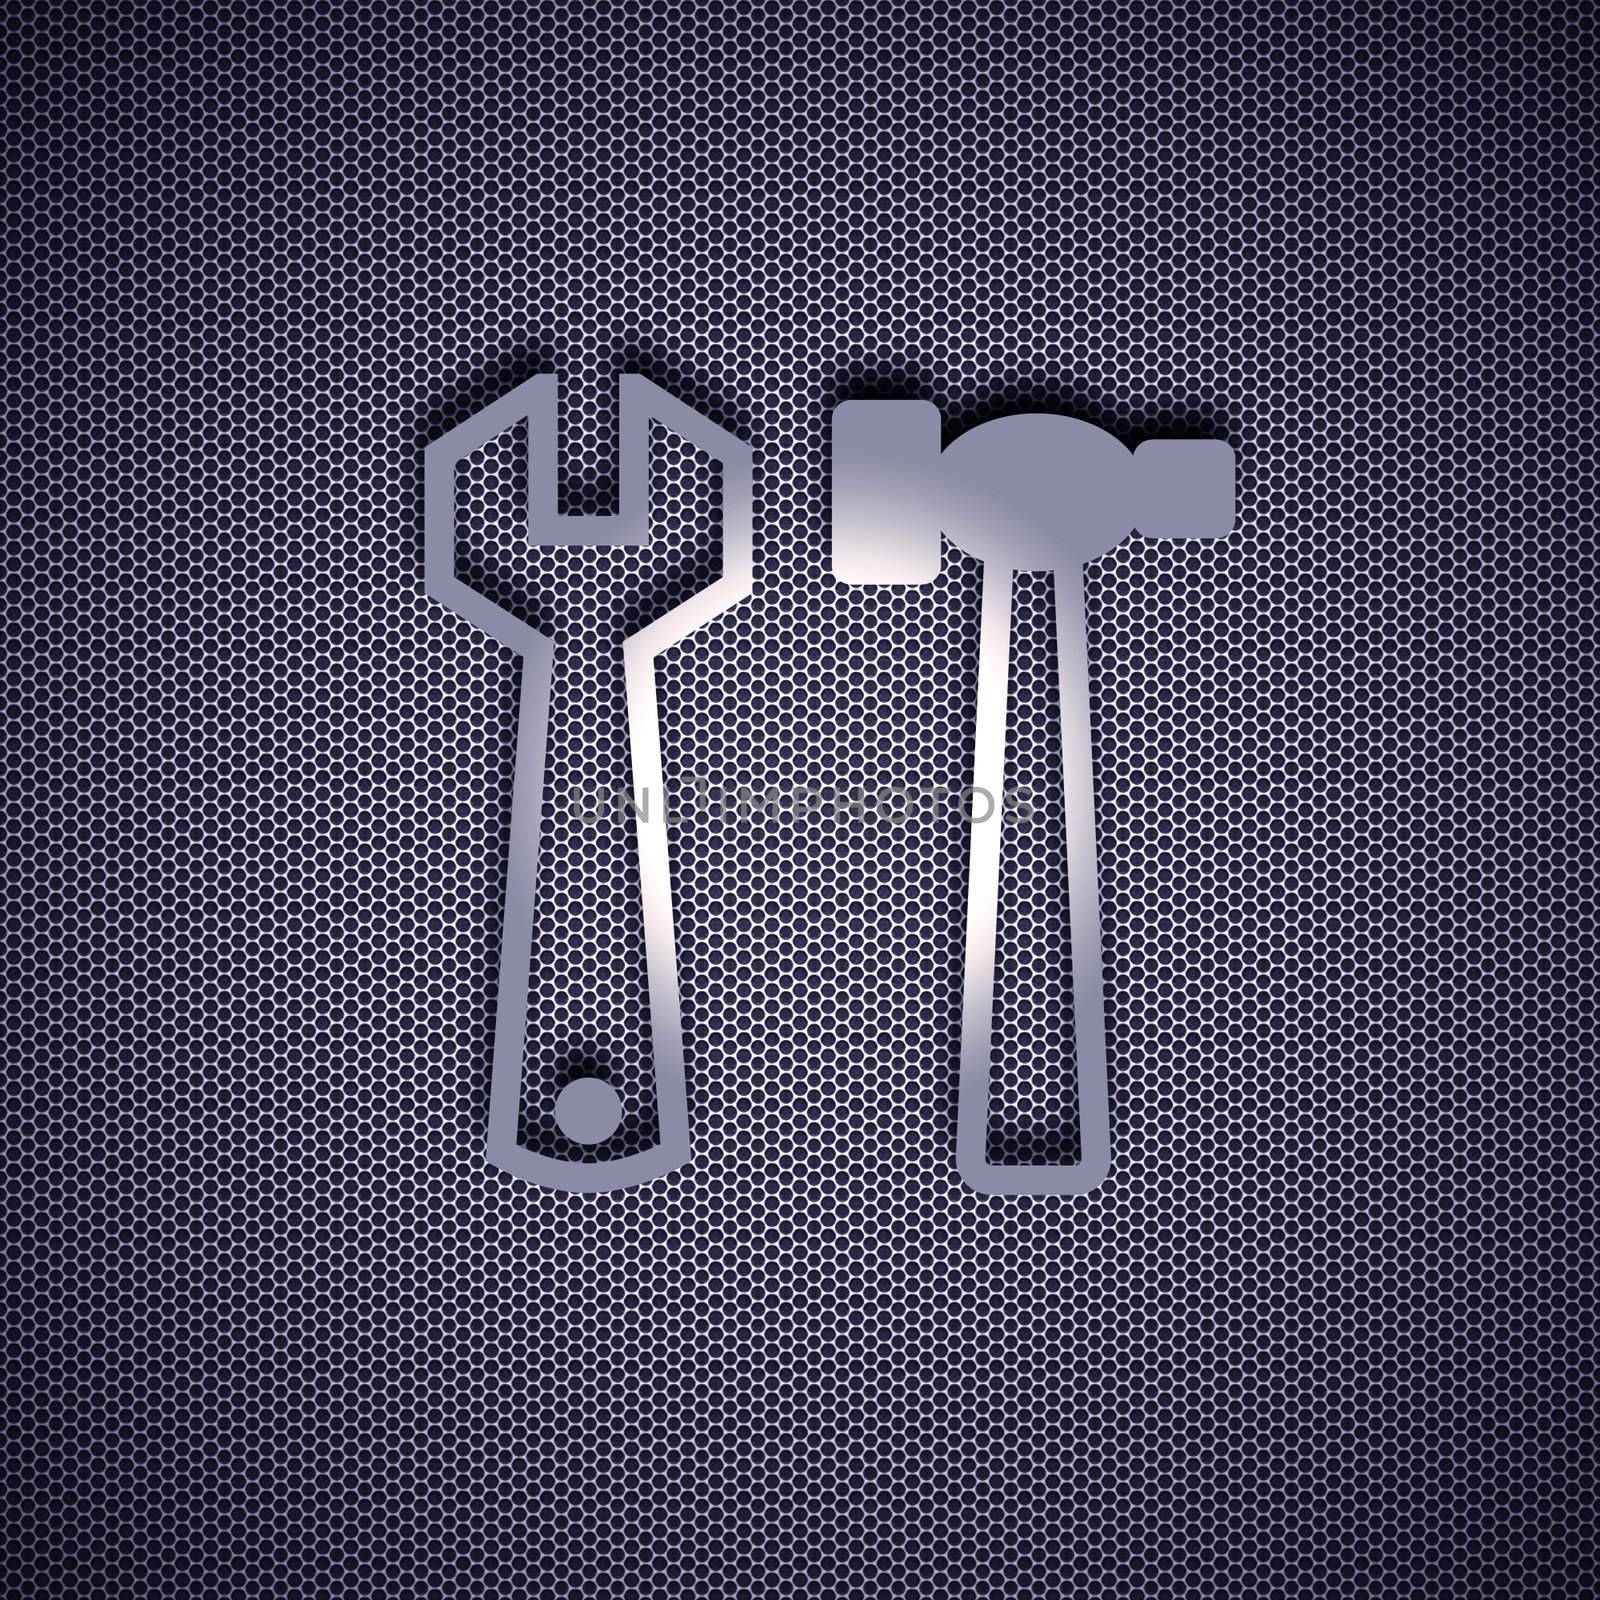 Tools icon grey, isolated on metal background. High resolution image.  3d rendered illustration.